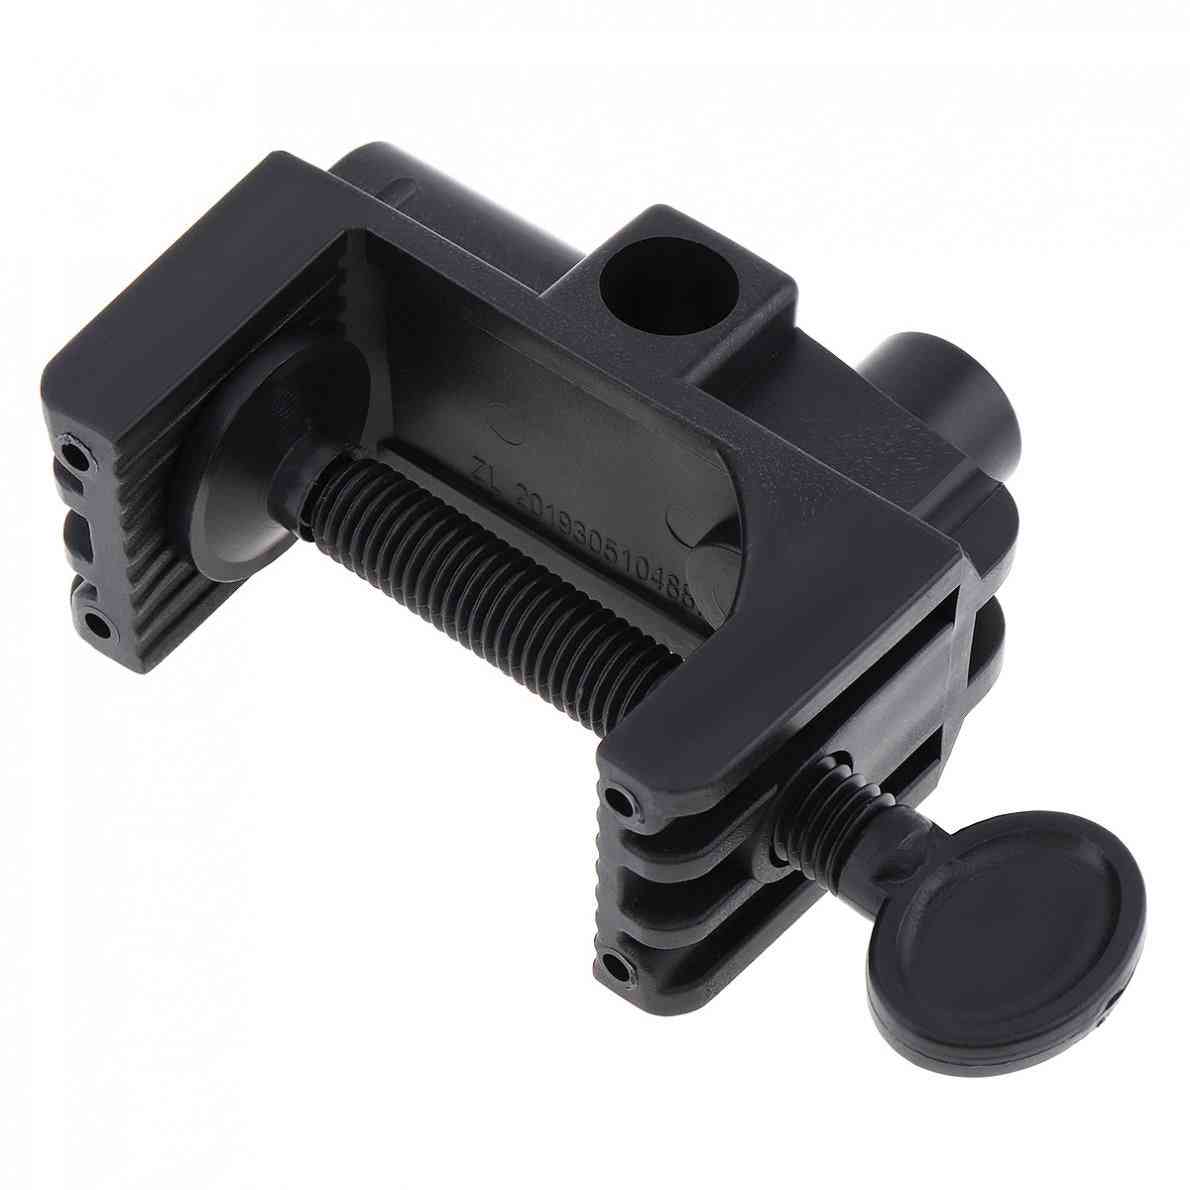 Fixed Clip Fittings, Screw Light Mounting Camera Holder